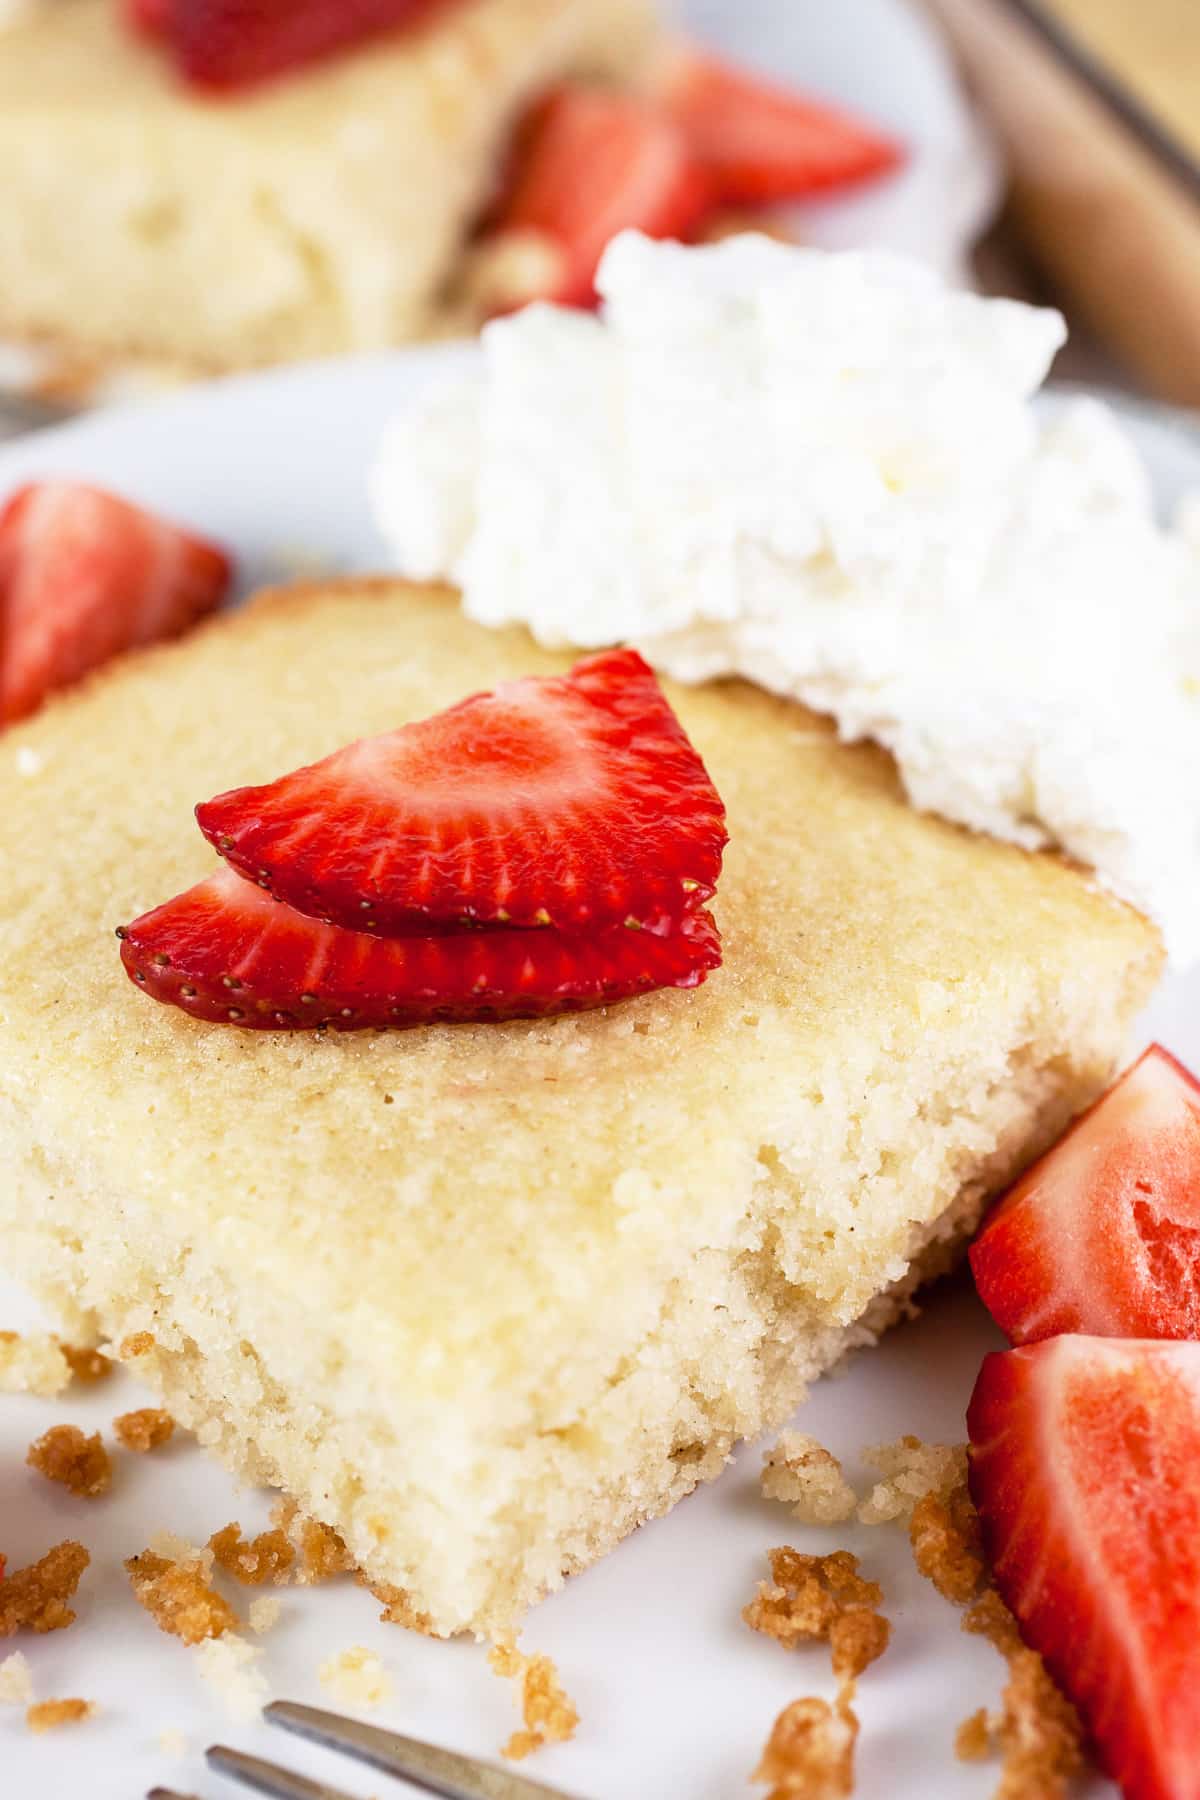 Scandinavian almond cake with strawberries and whipped cream on white plates.